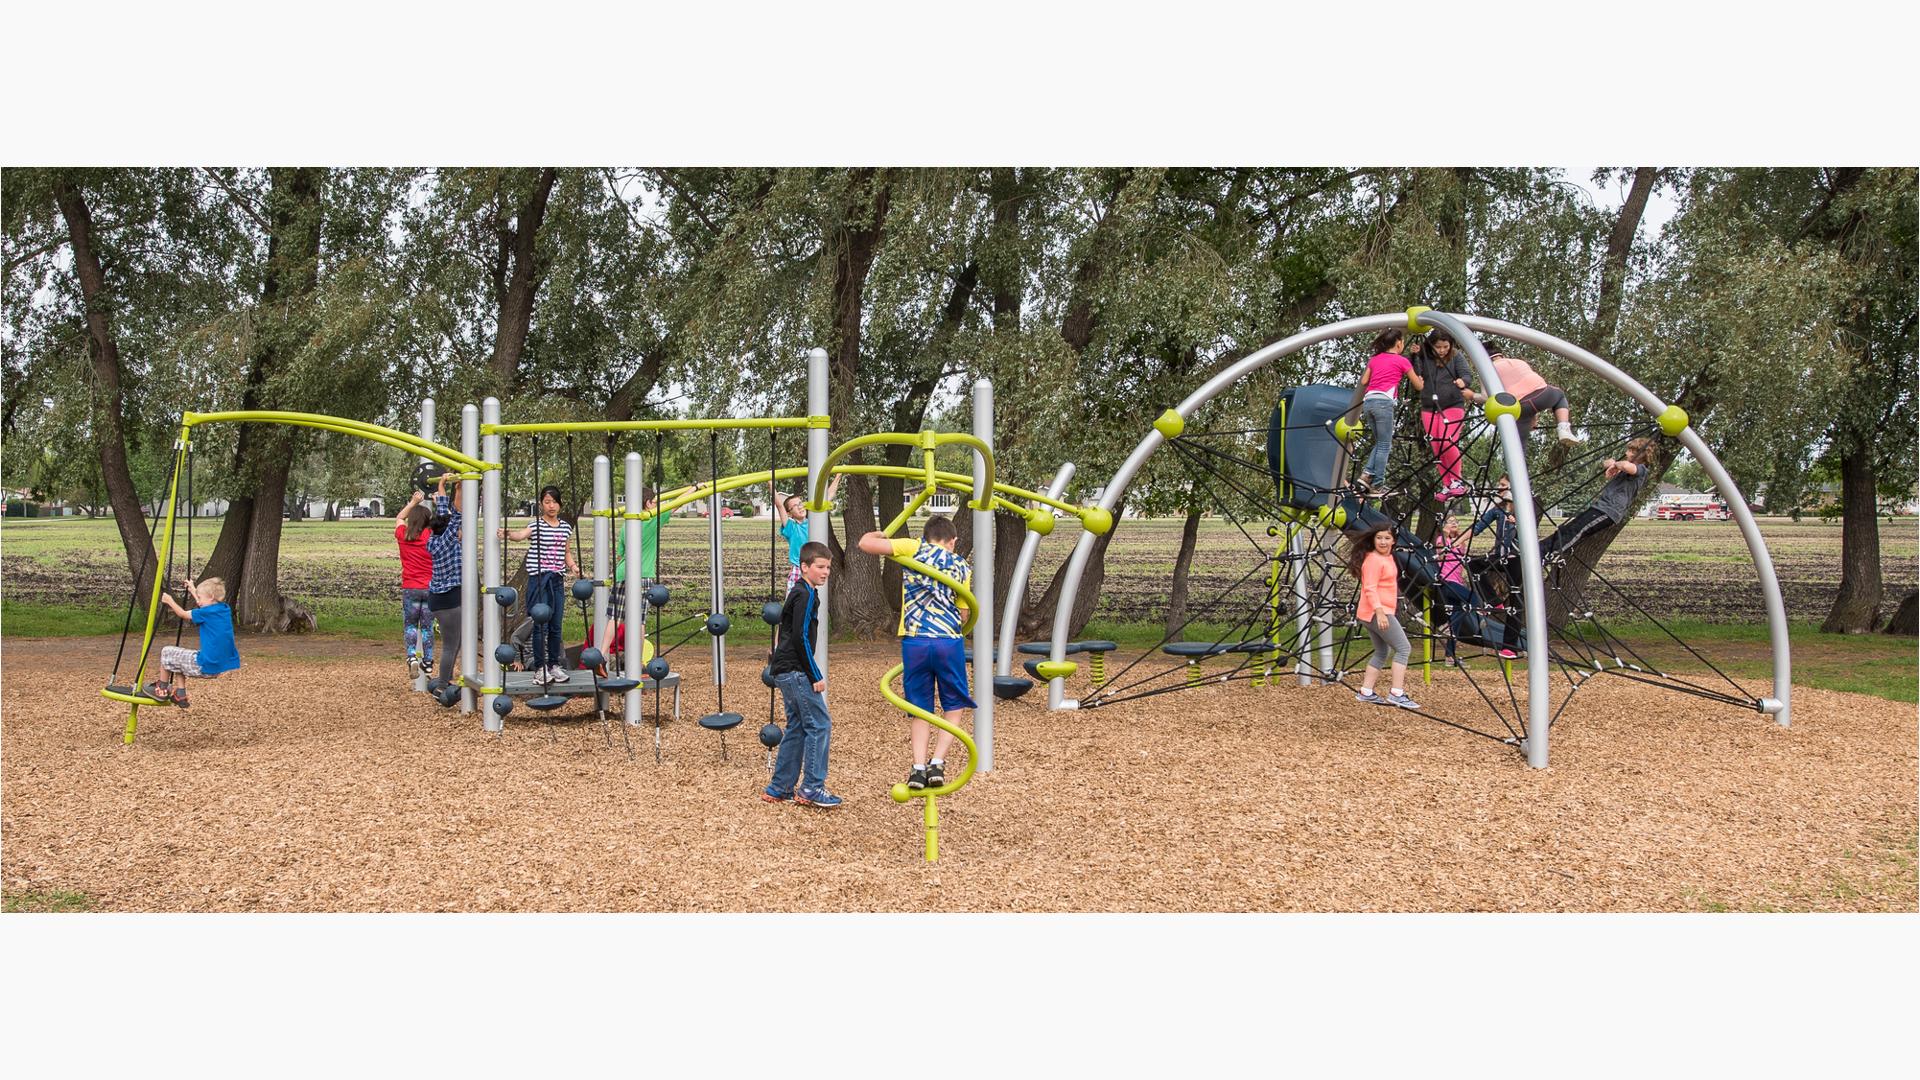 La Verendrye School Portage la Prairie, MB Canada. Playground features the Evos® Eclipse® Net Plus, arched posts, and star-shaped net climber. The Rush Slide extend the challenge and fun to more playground components. Bridges, climbers and playground spinners for ages 5-12.